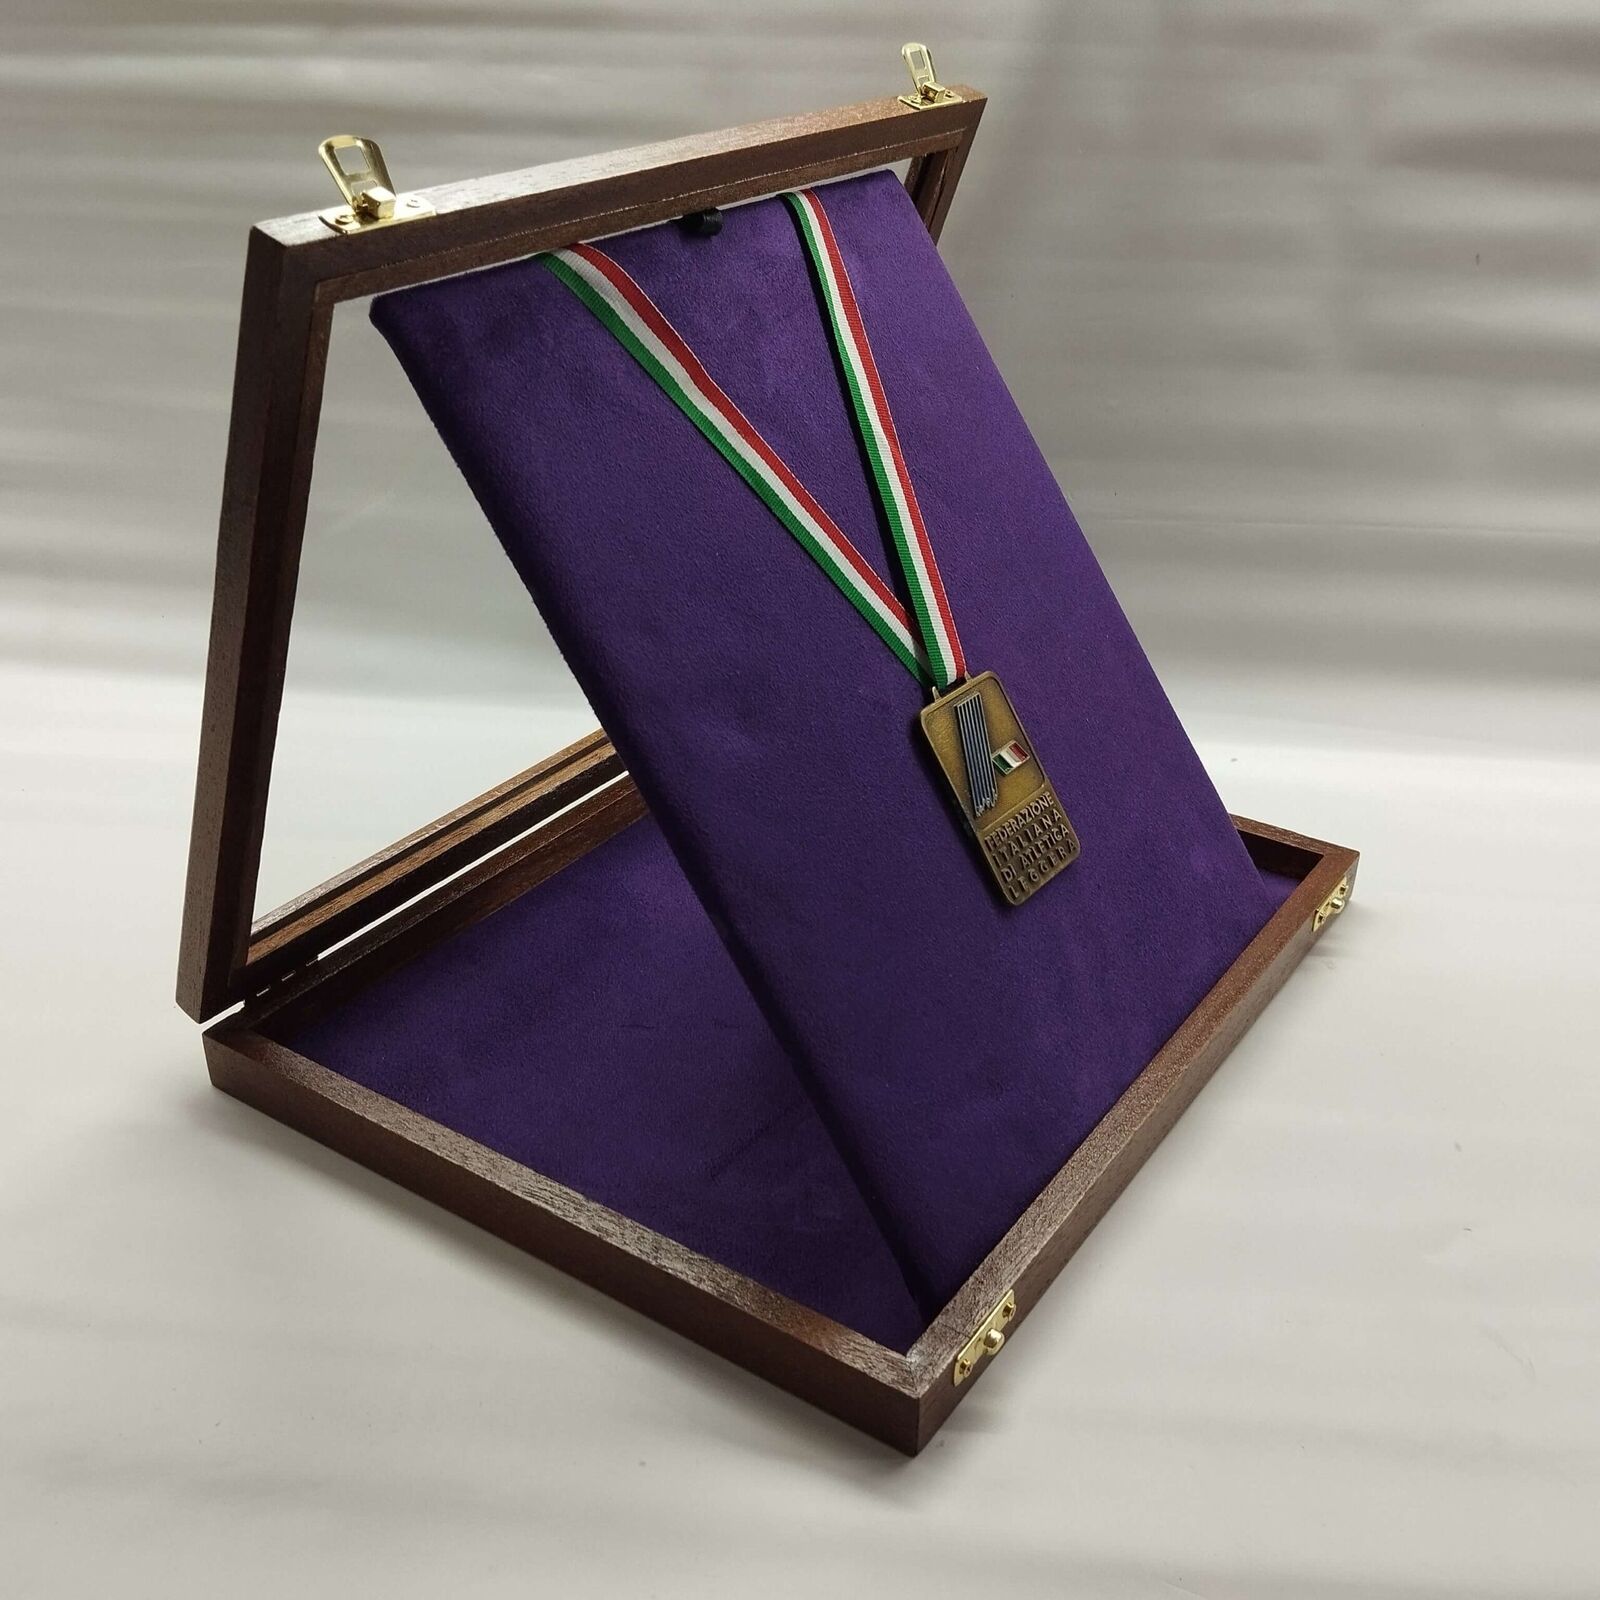 Primary image for Frame for Medals Or Onorificenze With Ribbon (MED-M2)